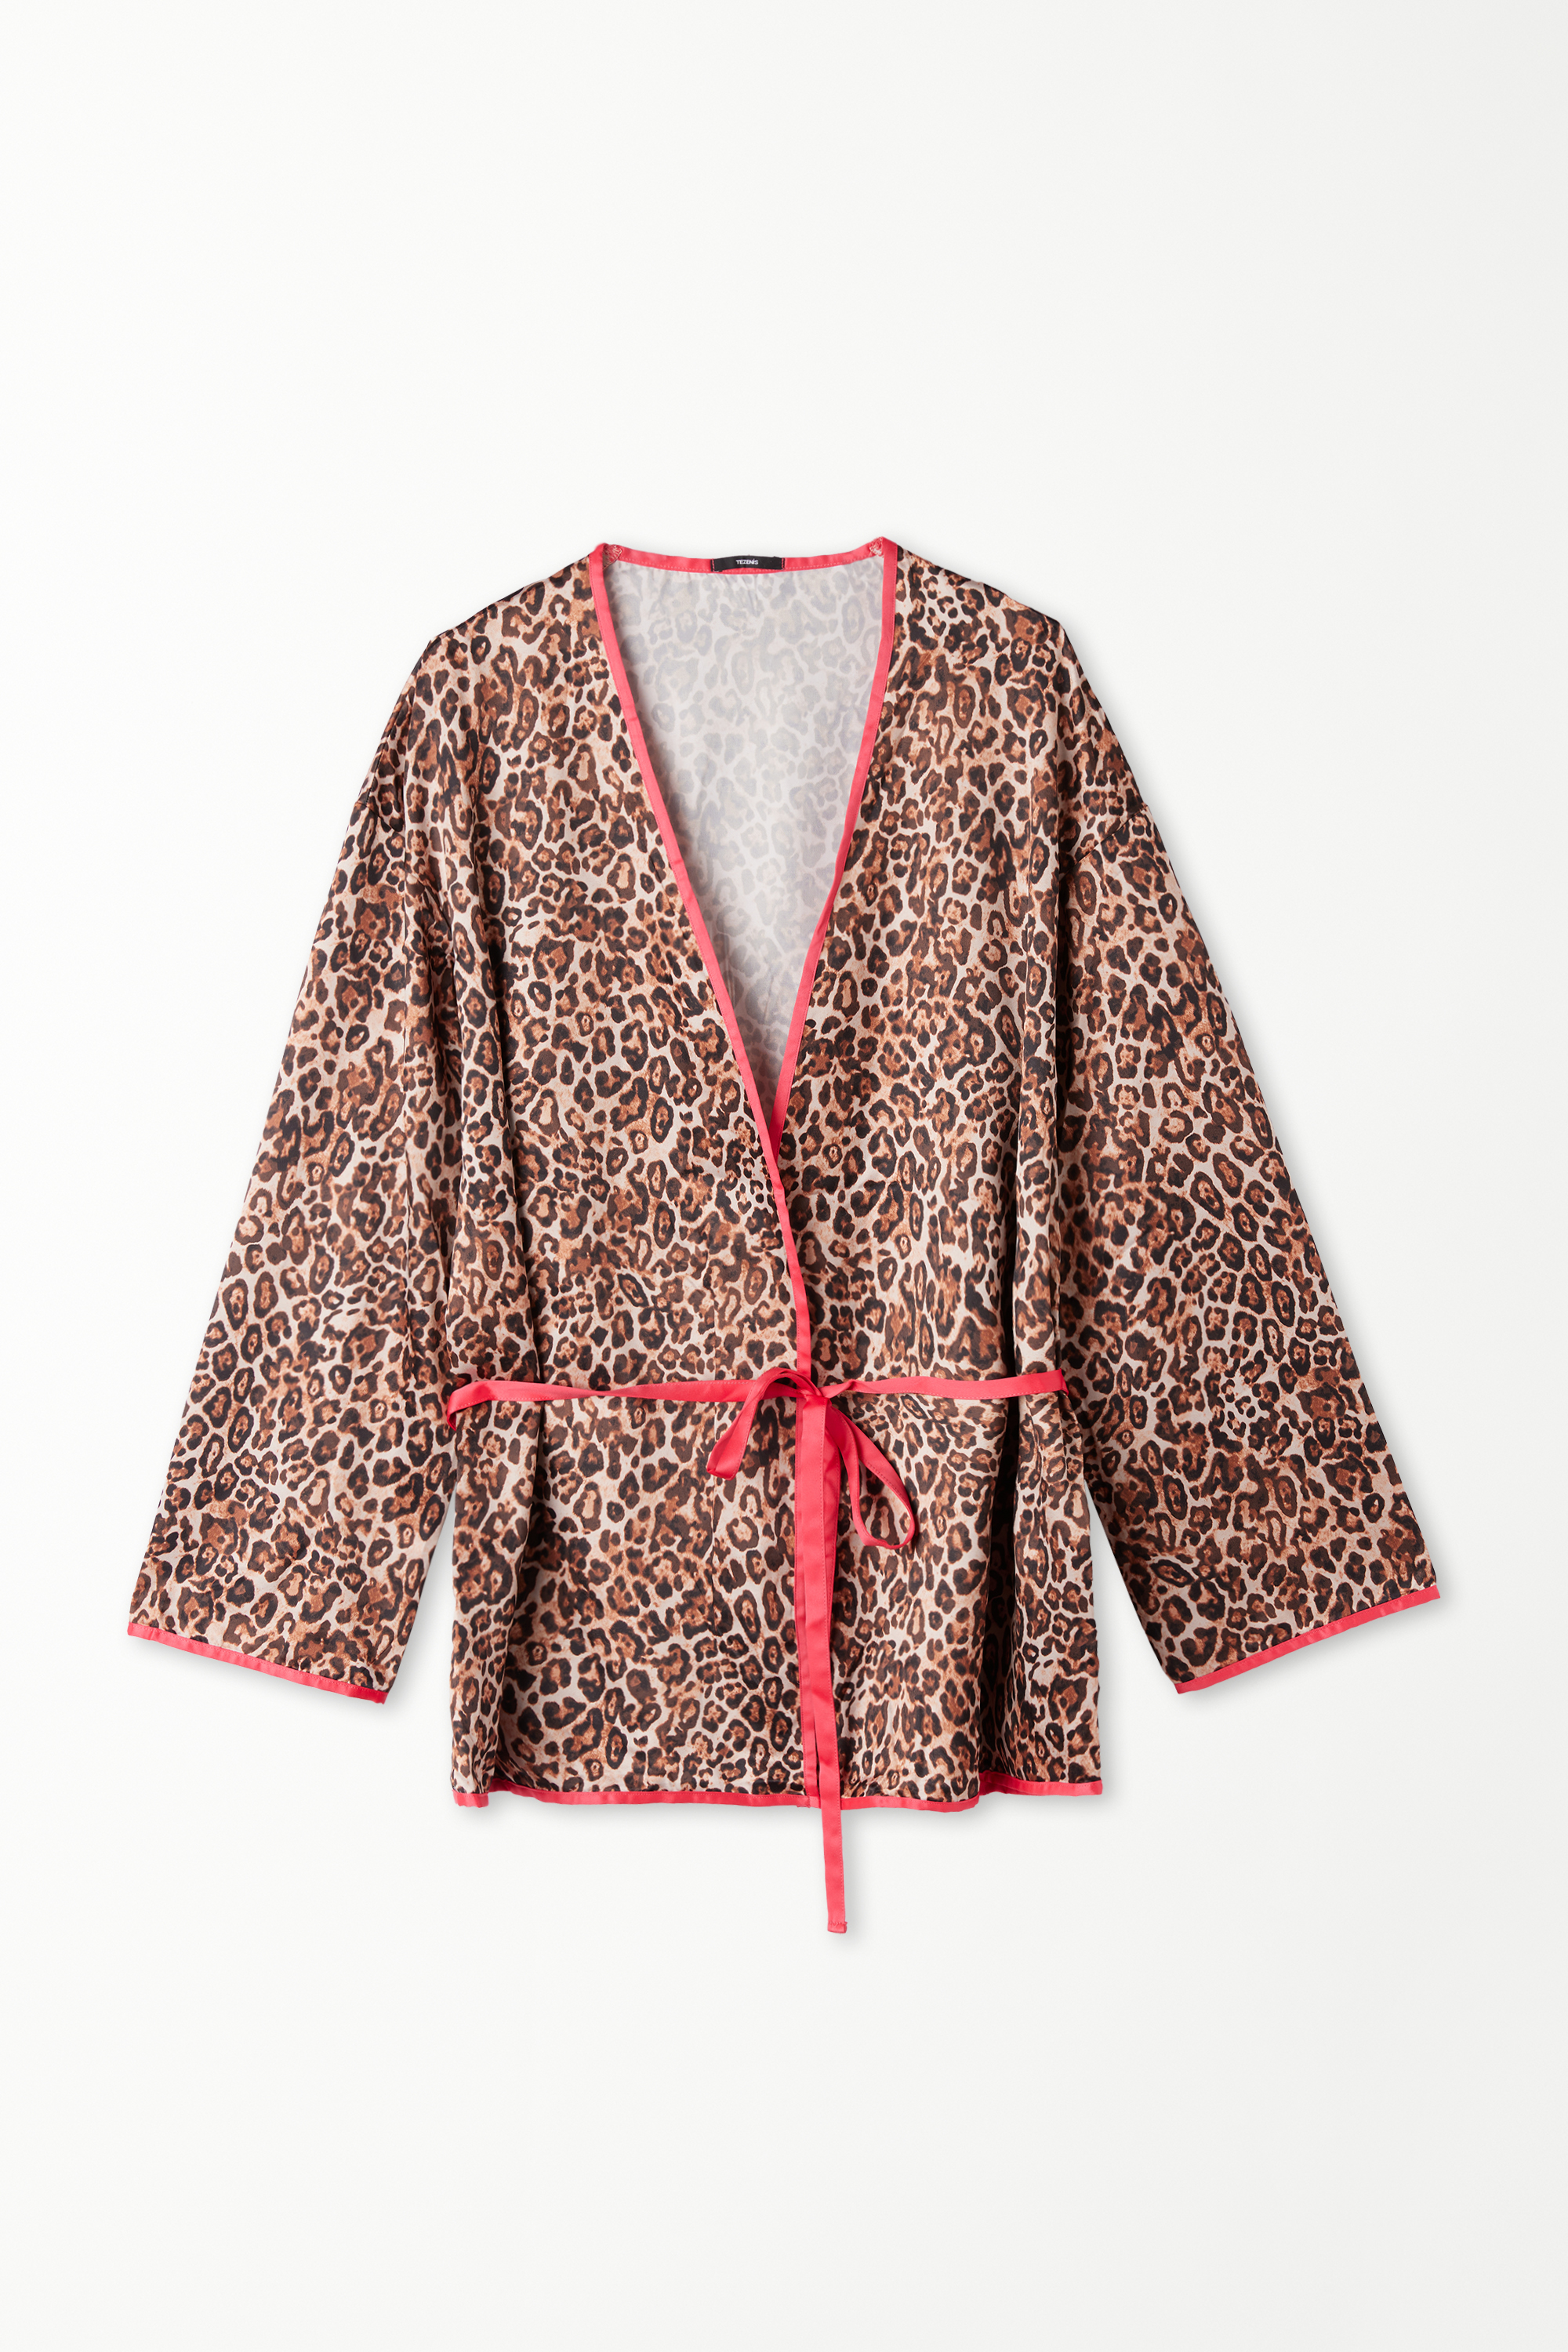 Strawberry Leopard Long-Sleeved Short Dressing Gown with Sash